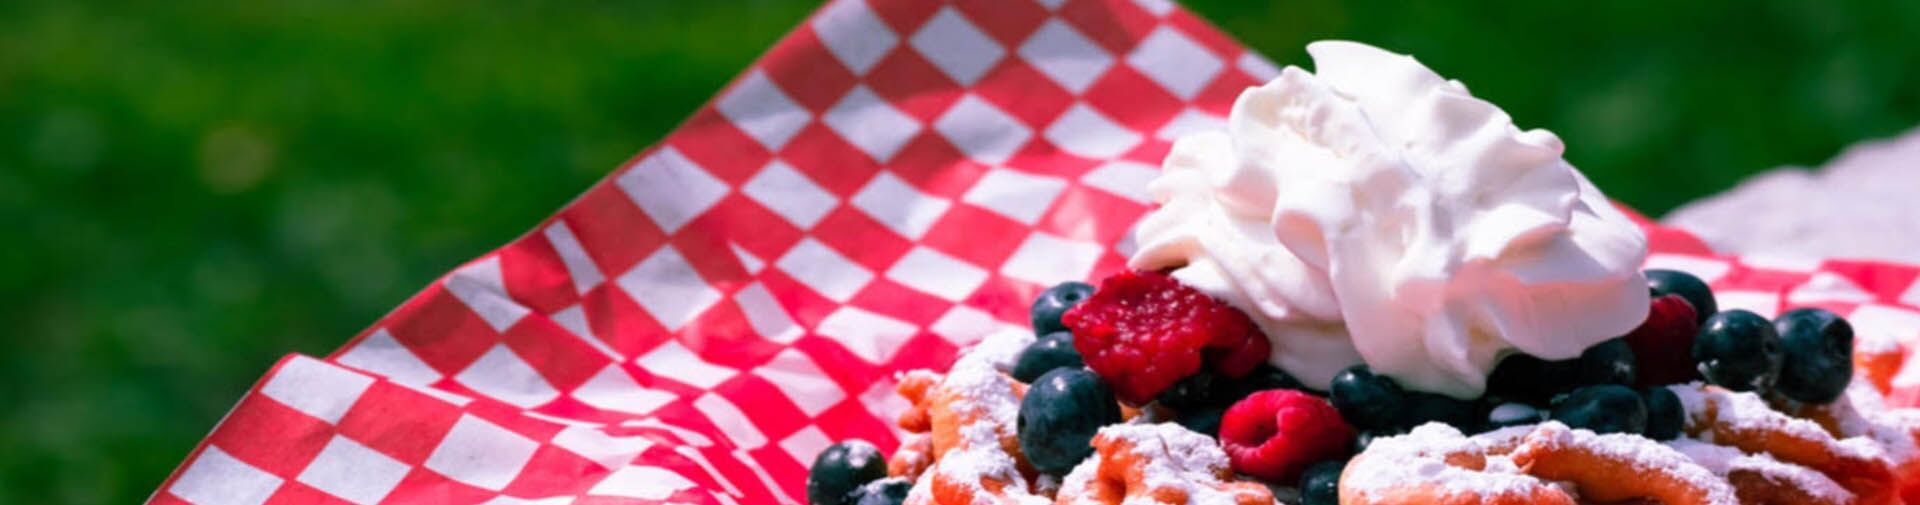 Funnel Cake Stand at a Festival Editorial Photo - Image of obesity, frying:  79393836